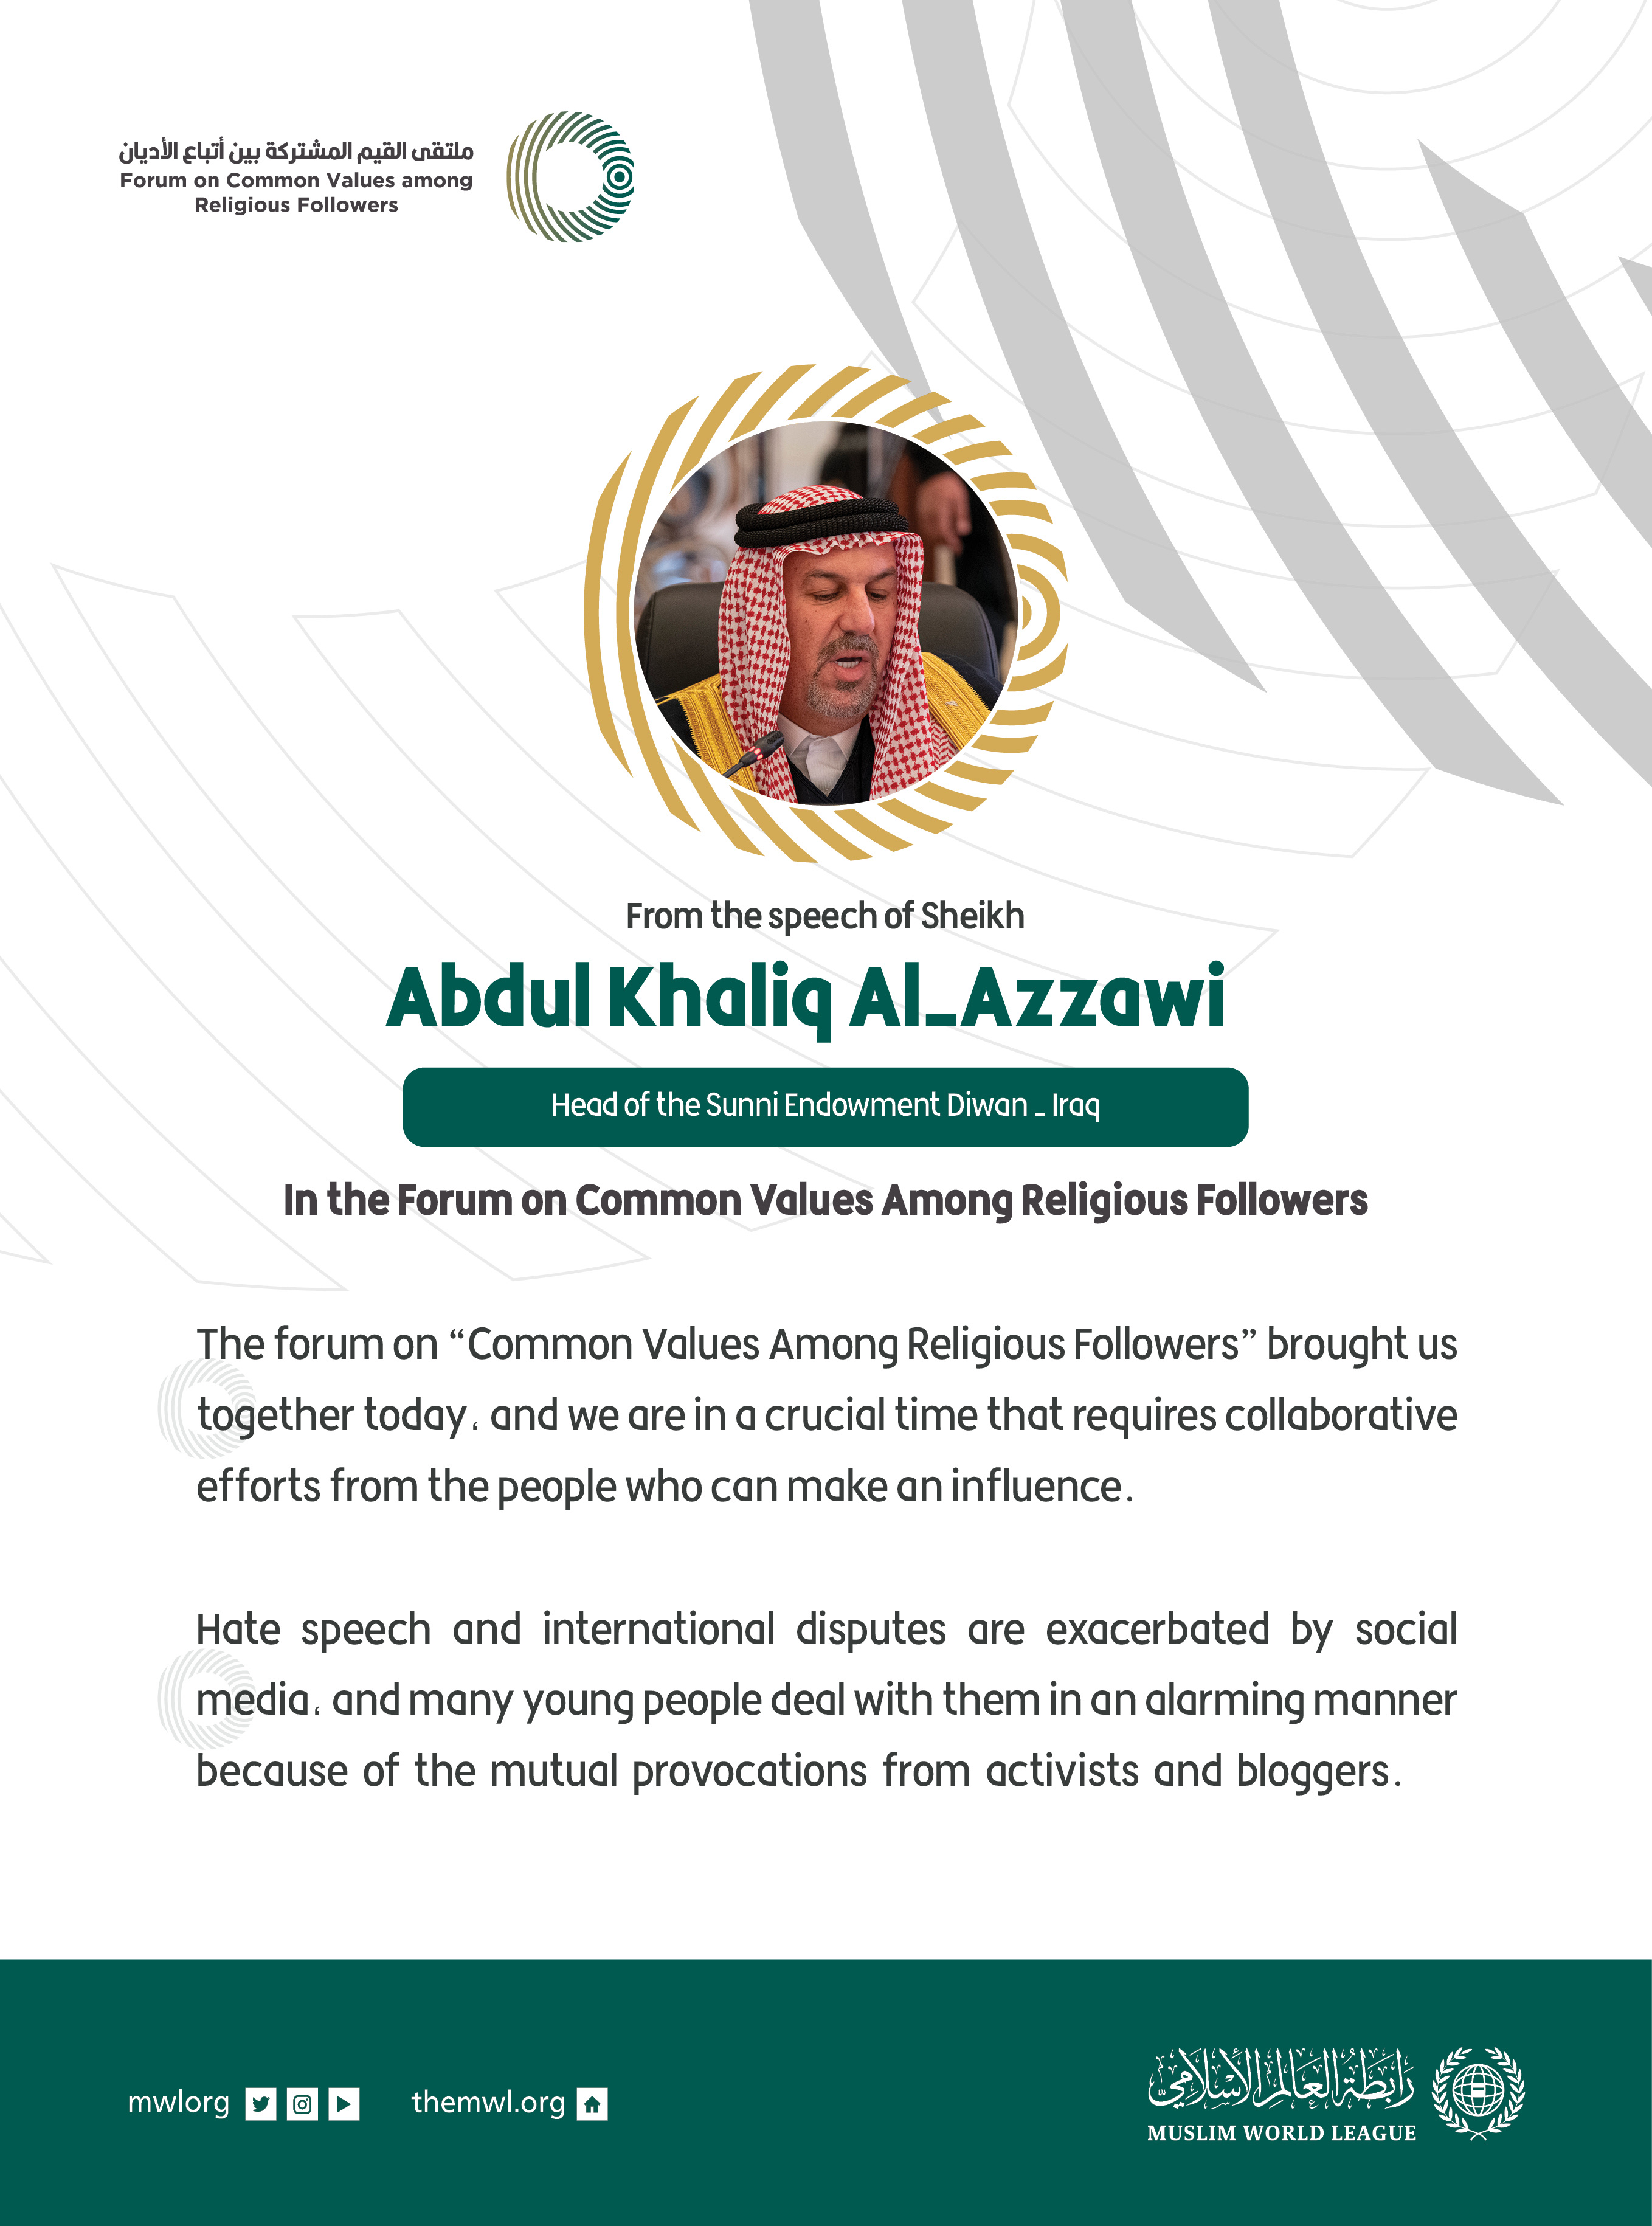 From the speech of the Head of the Sunni Endowment Diwan - Iraq, Sheikh Abdul Khaliq Al-Azzawi, in the Forum on Common Values Among Religious Followers in Riyadh: